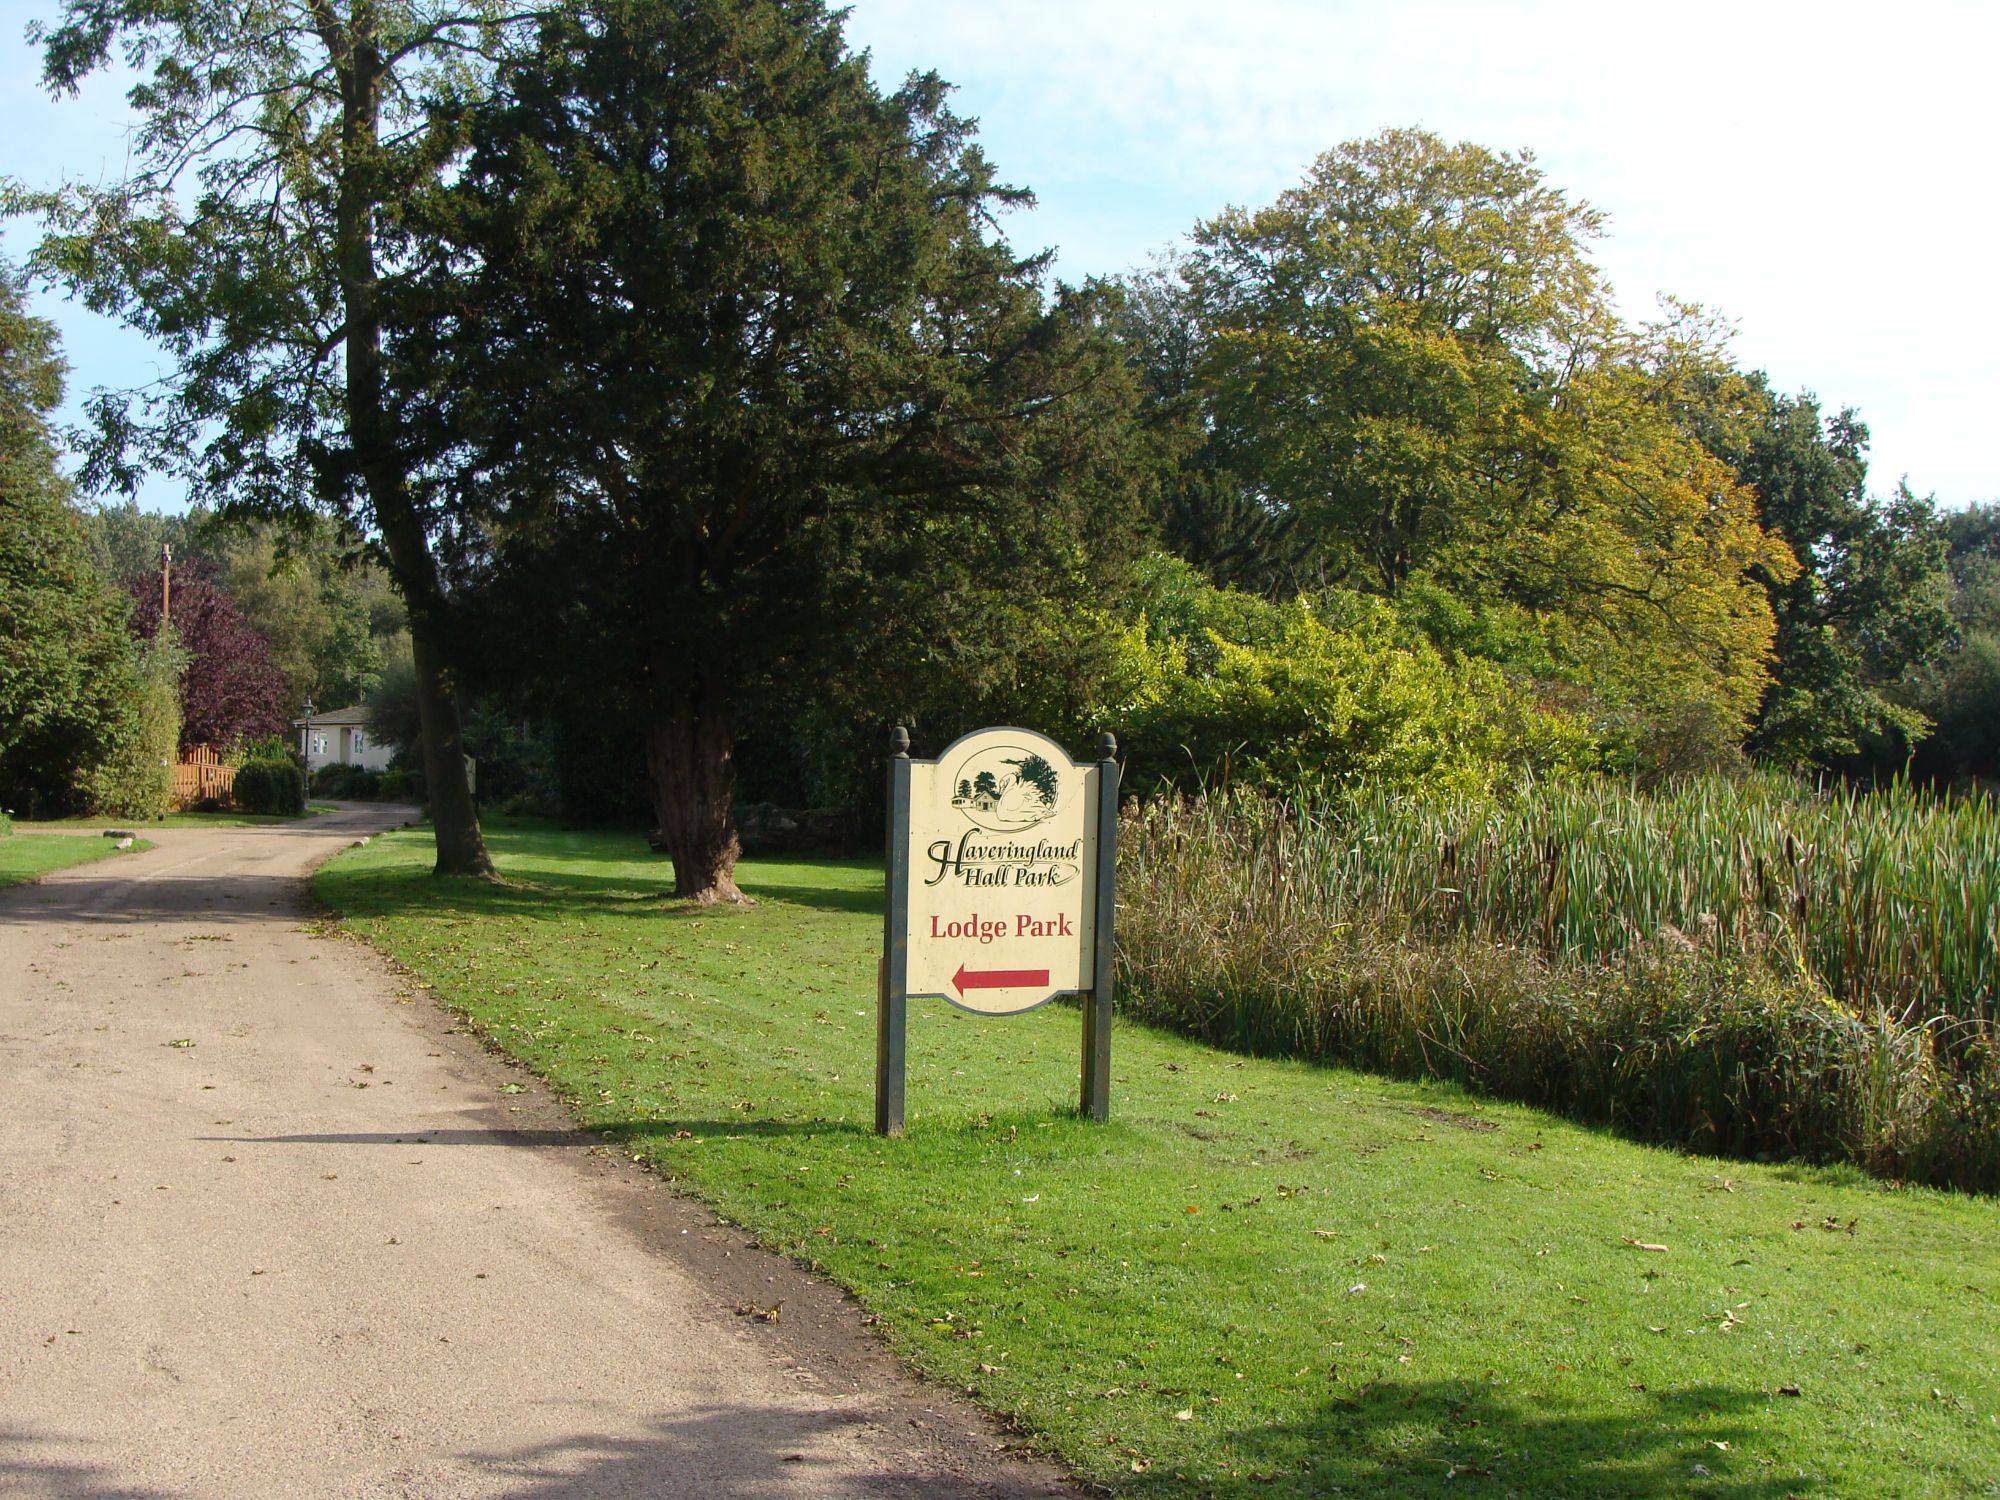 Entrance to the lodge park